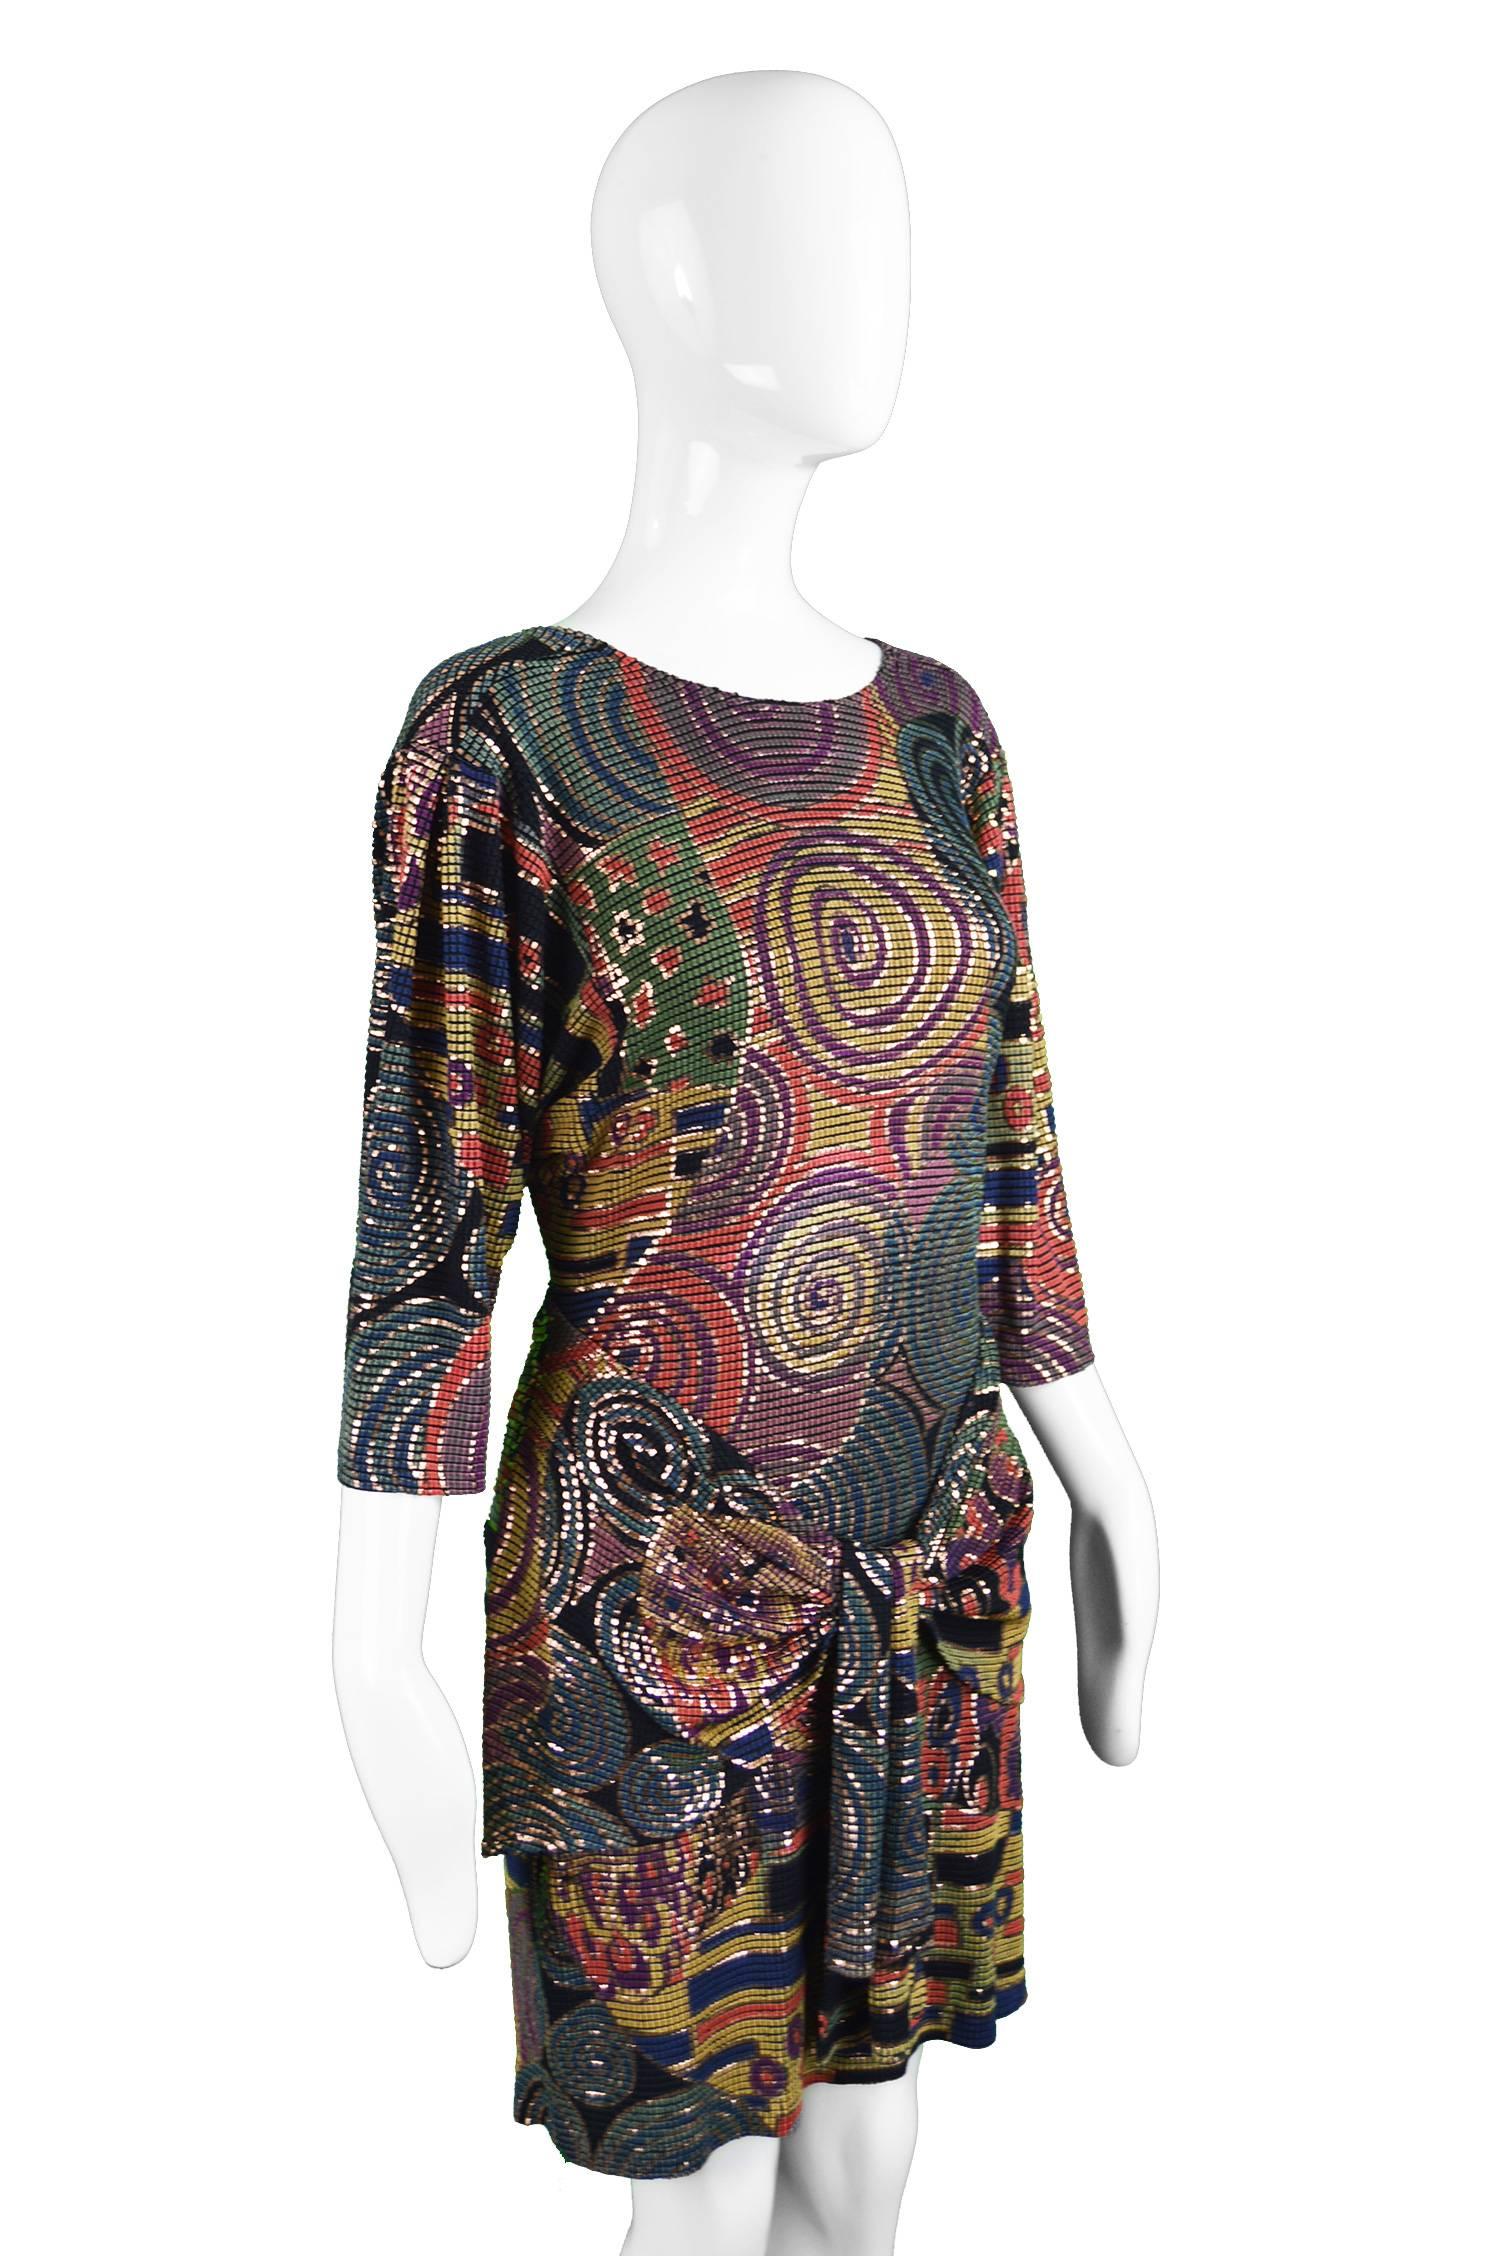 Caché Metallic Painted Mosaic Draped Vintage Evening Dress, 1980s For Sale 2